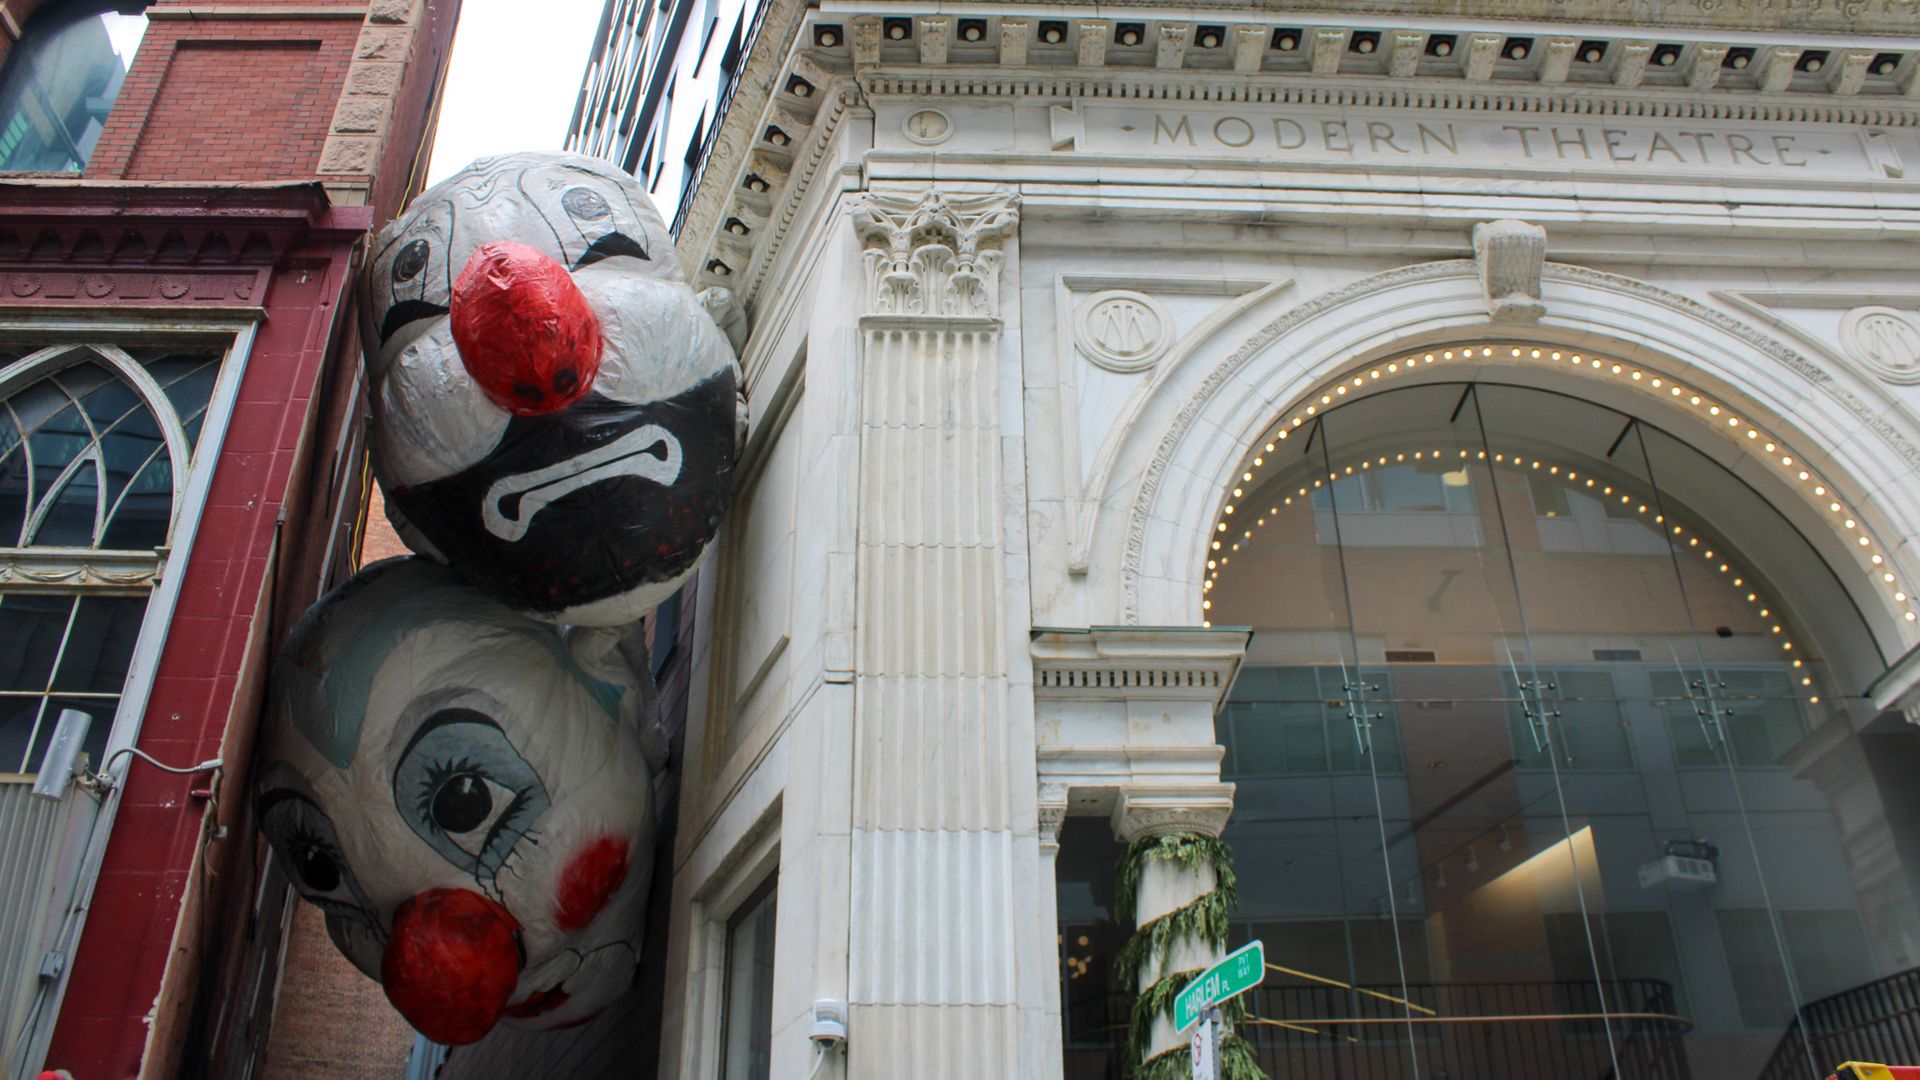 Two massive, inflatable clown heads hang in an alley between two buildings in downtown Boston. It's an art installation called "Endgame" by artist Max Streicher